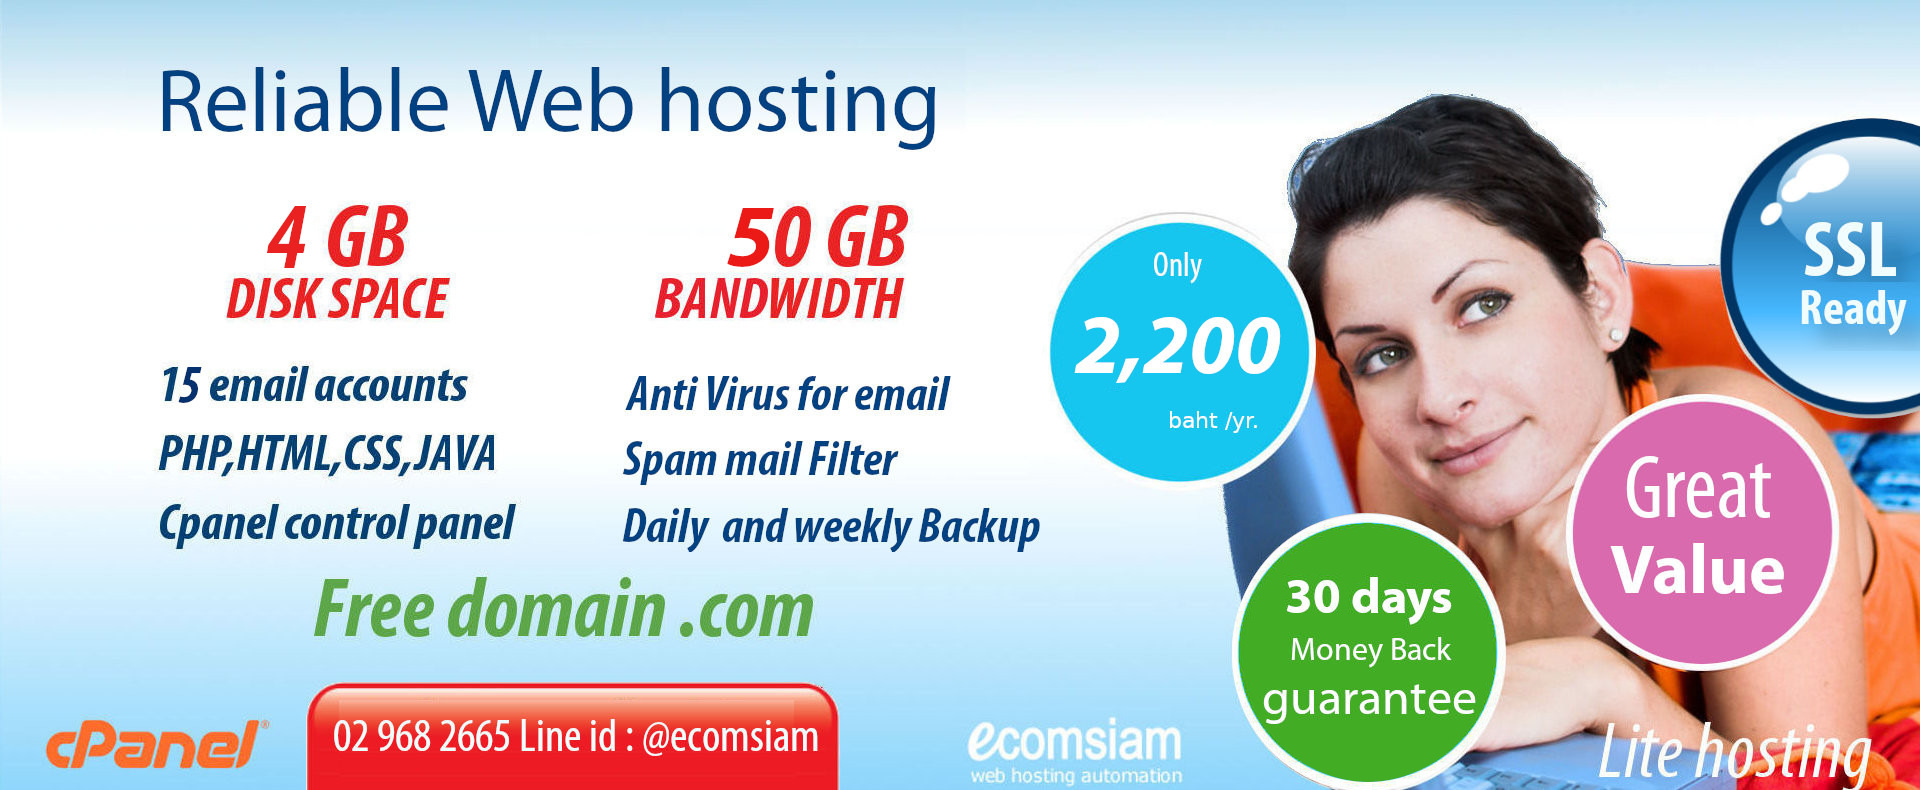 web hosting thailand free domain-liteplan-only 2200 baht/year Free domain and SSL ready - build your website and email using - Great customer care and support 